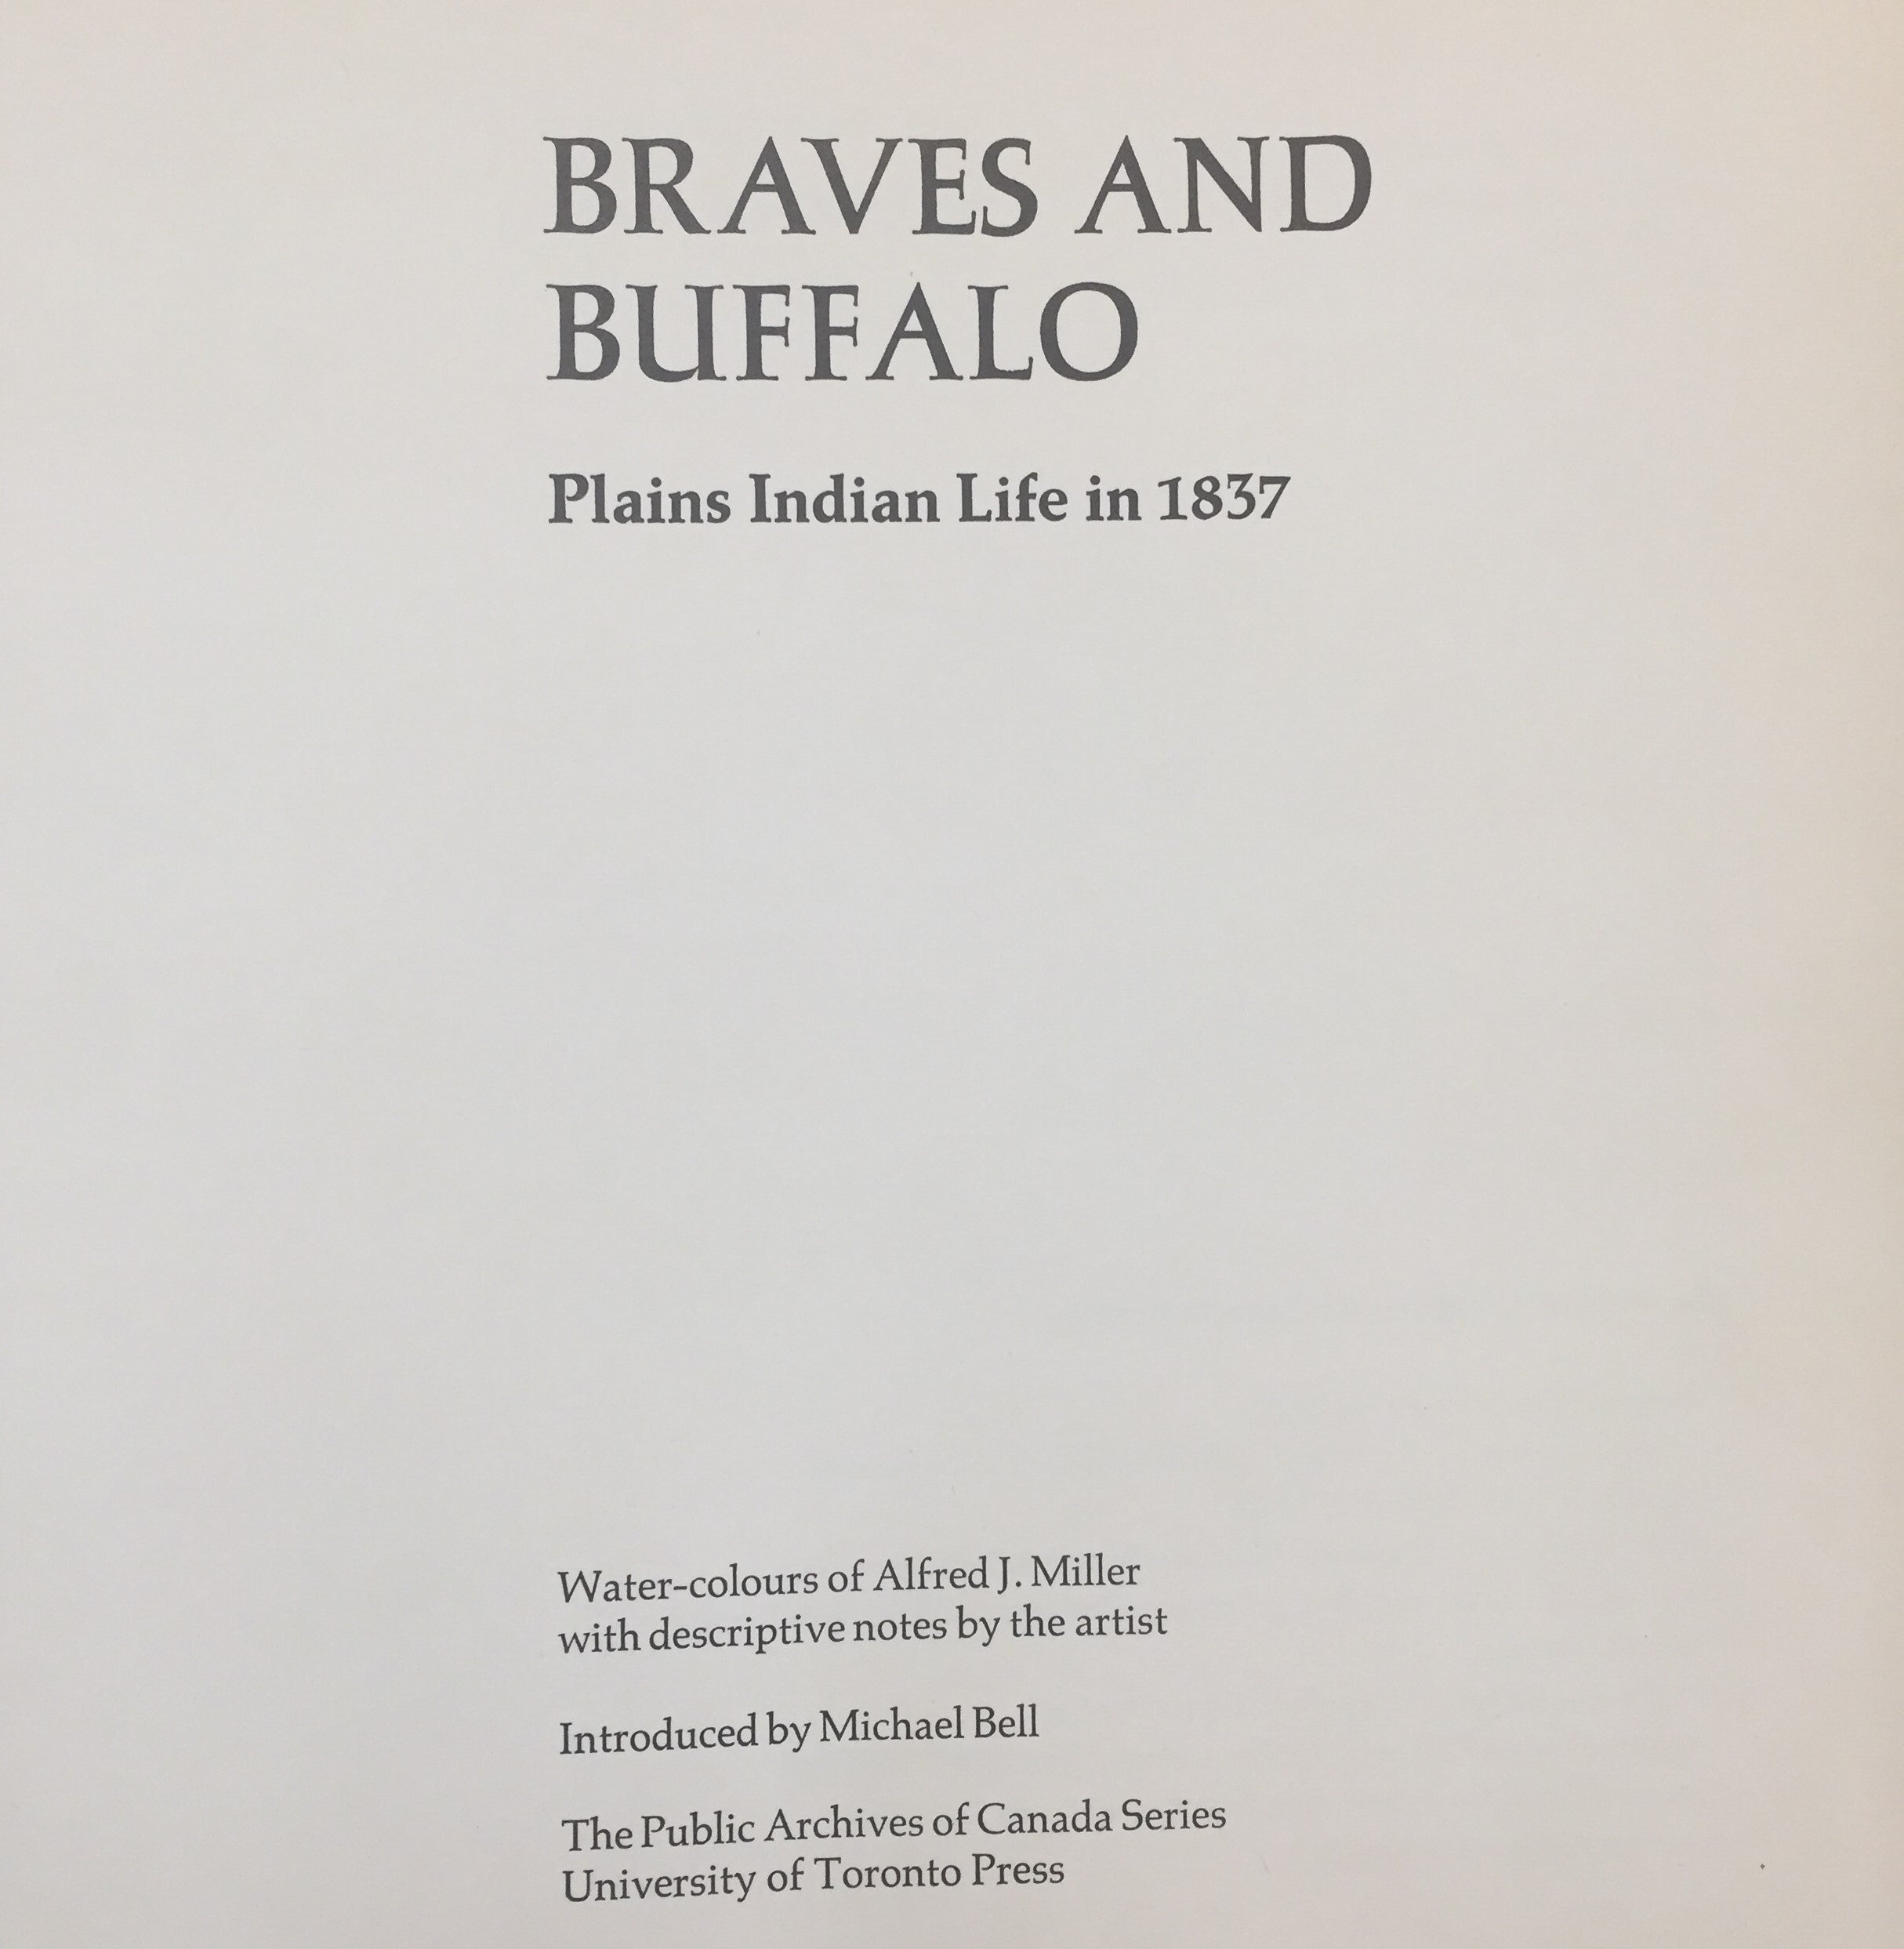 BOOKS - Braves and Buffalo by Alfred J. Miller